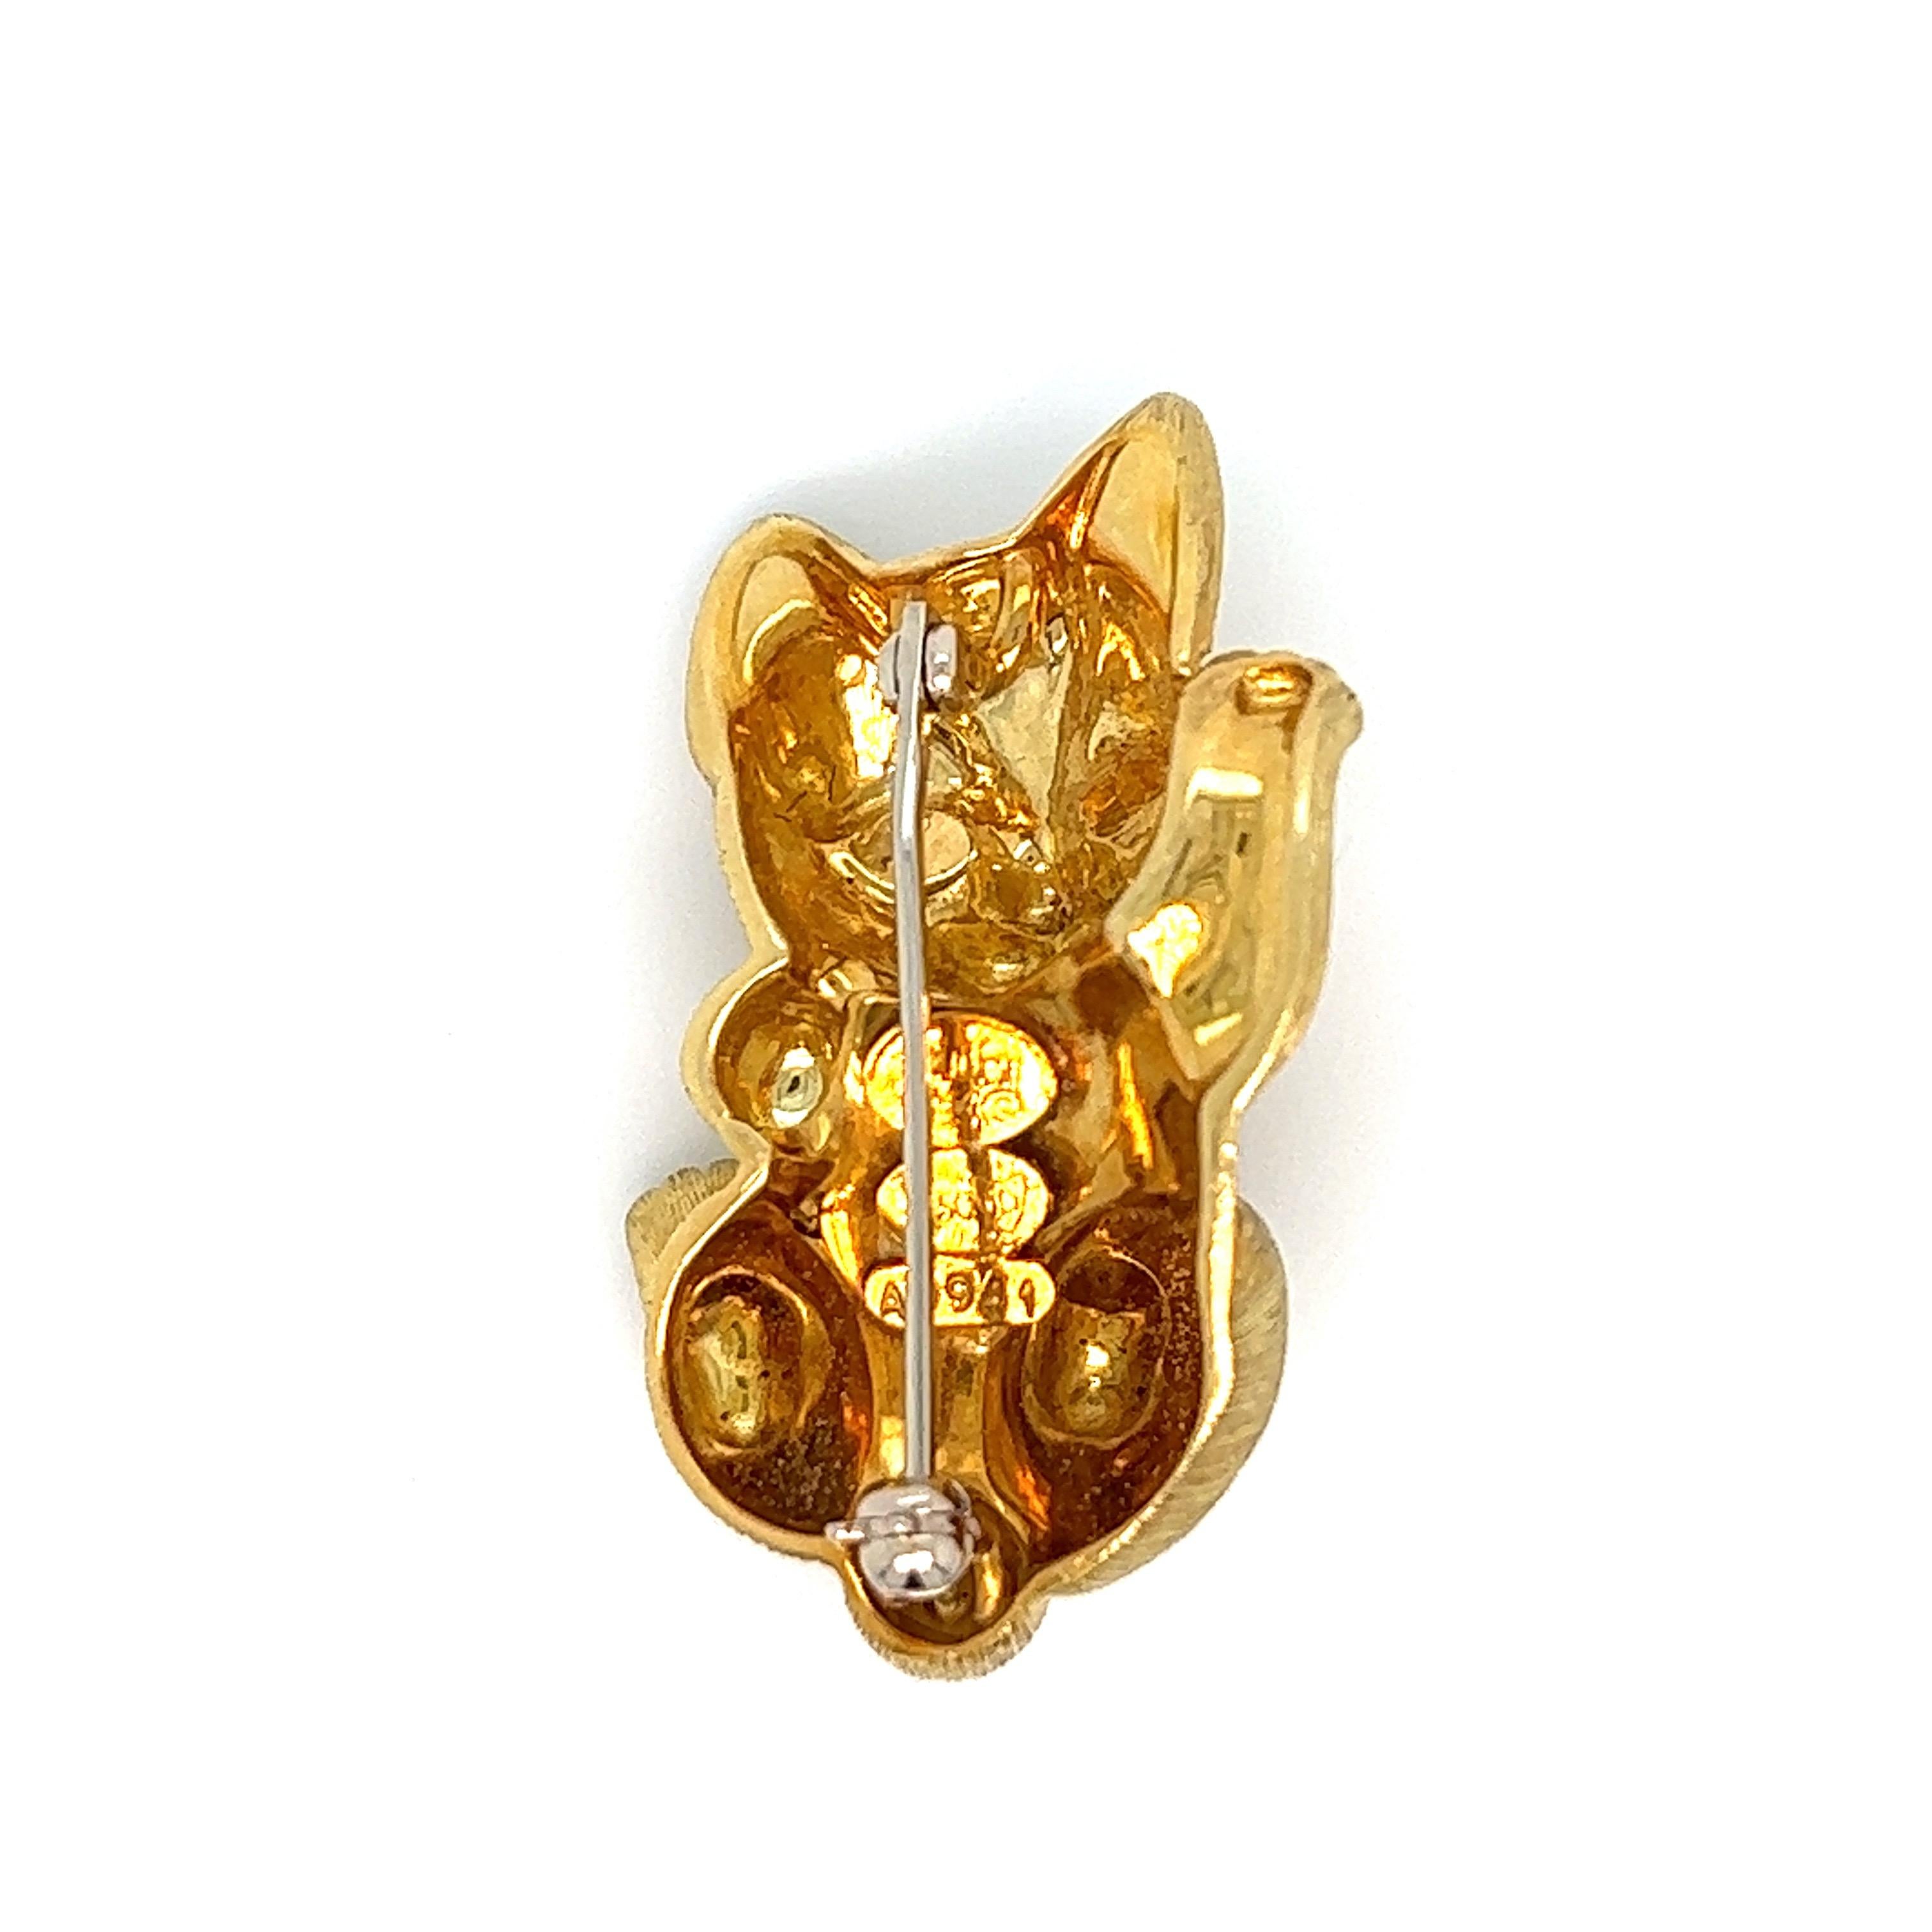 Henry Dunay 18 karat yellow gold kitty cat pin brooch. Serial no. A9941. Marked: Dunay / 18k / 750 / A9941. Total weight: 13.9 grams. Width: 1 inch. Length: 1.38 inch. 